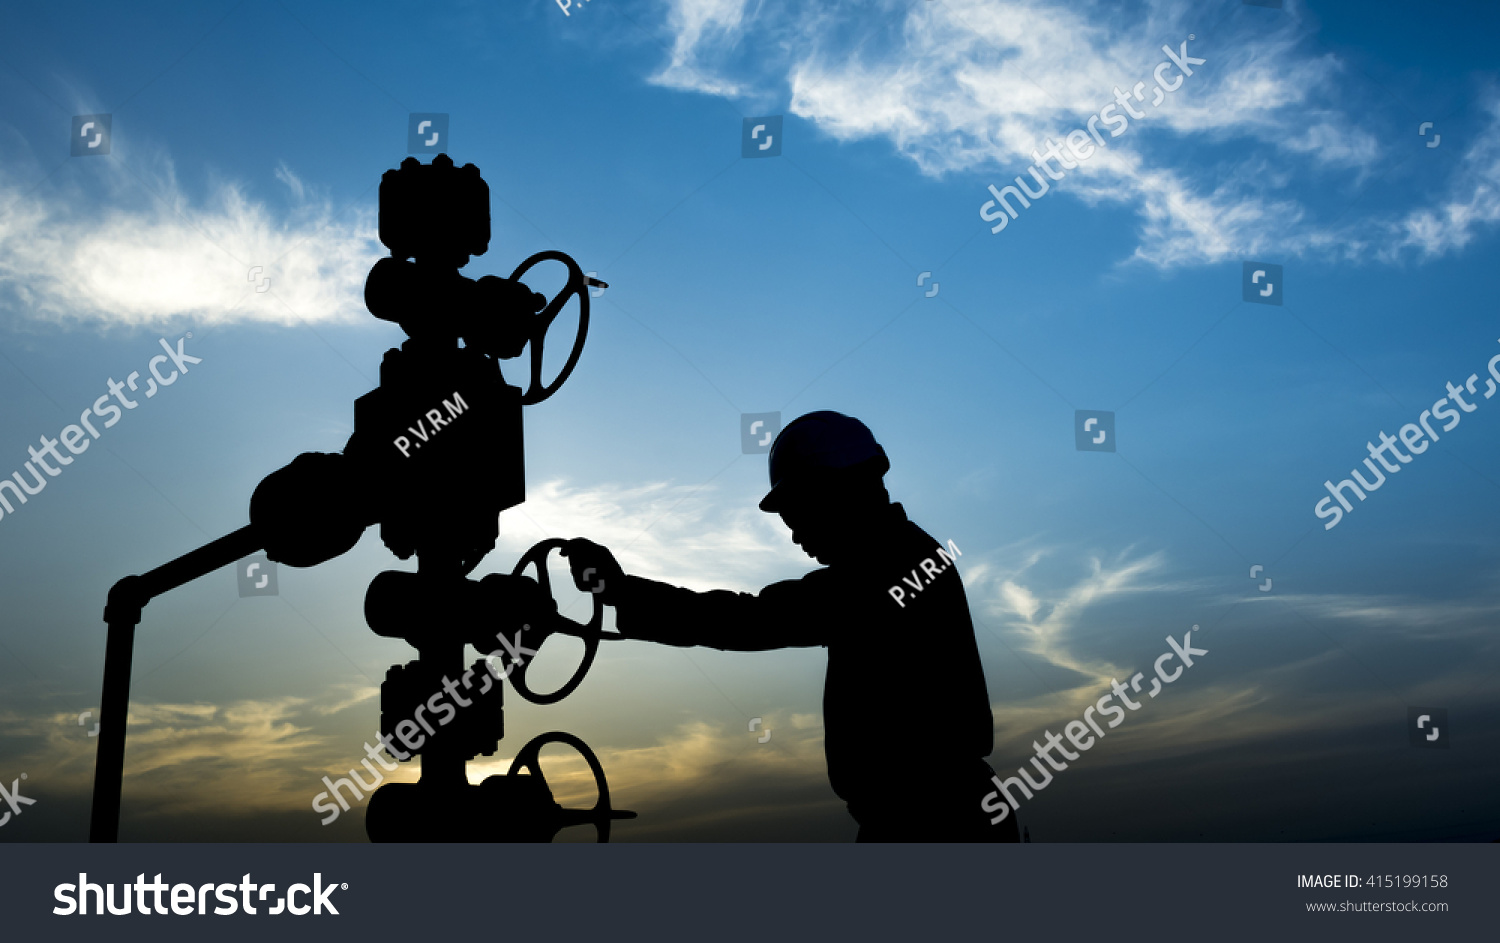 Sunset and silhouette of oilfield worker monitoring wellhead controls in oilfield  #415199158